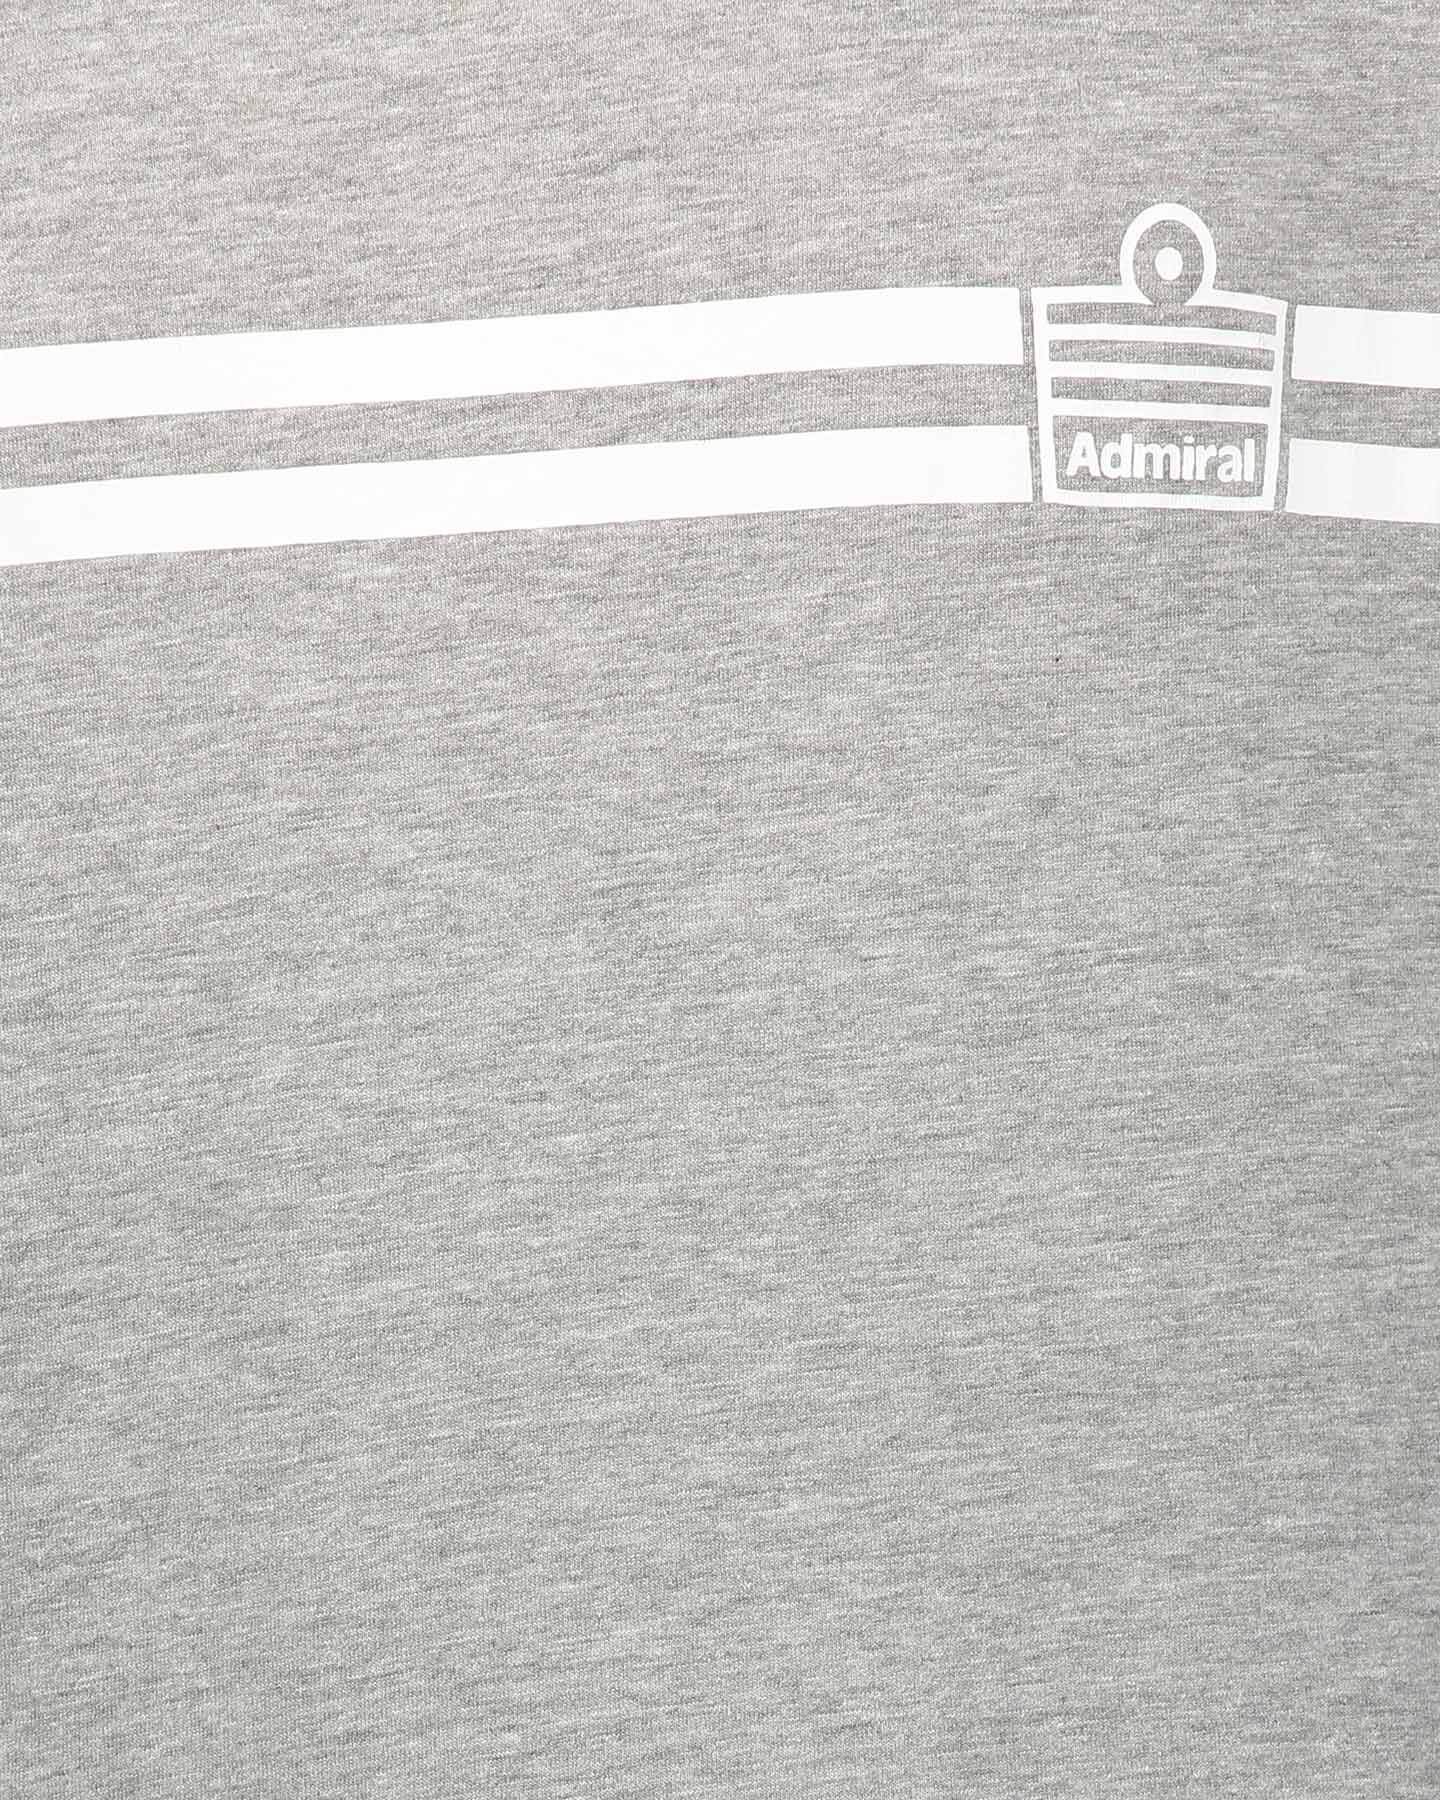  T-Shirt ADMIRAL SMALL LOGO M S4086973|GM03|XS scatto 2